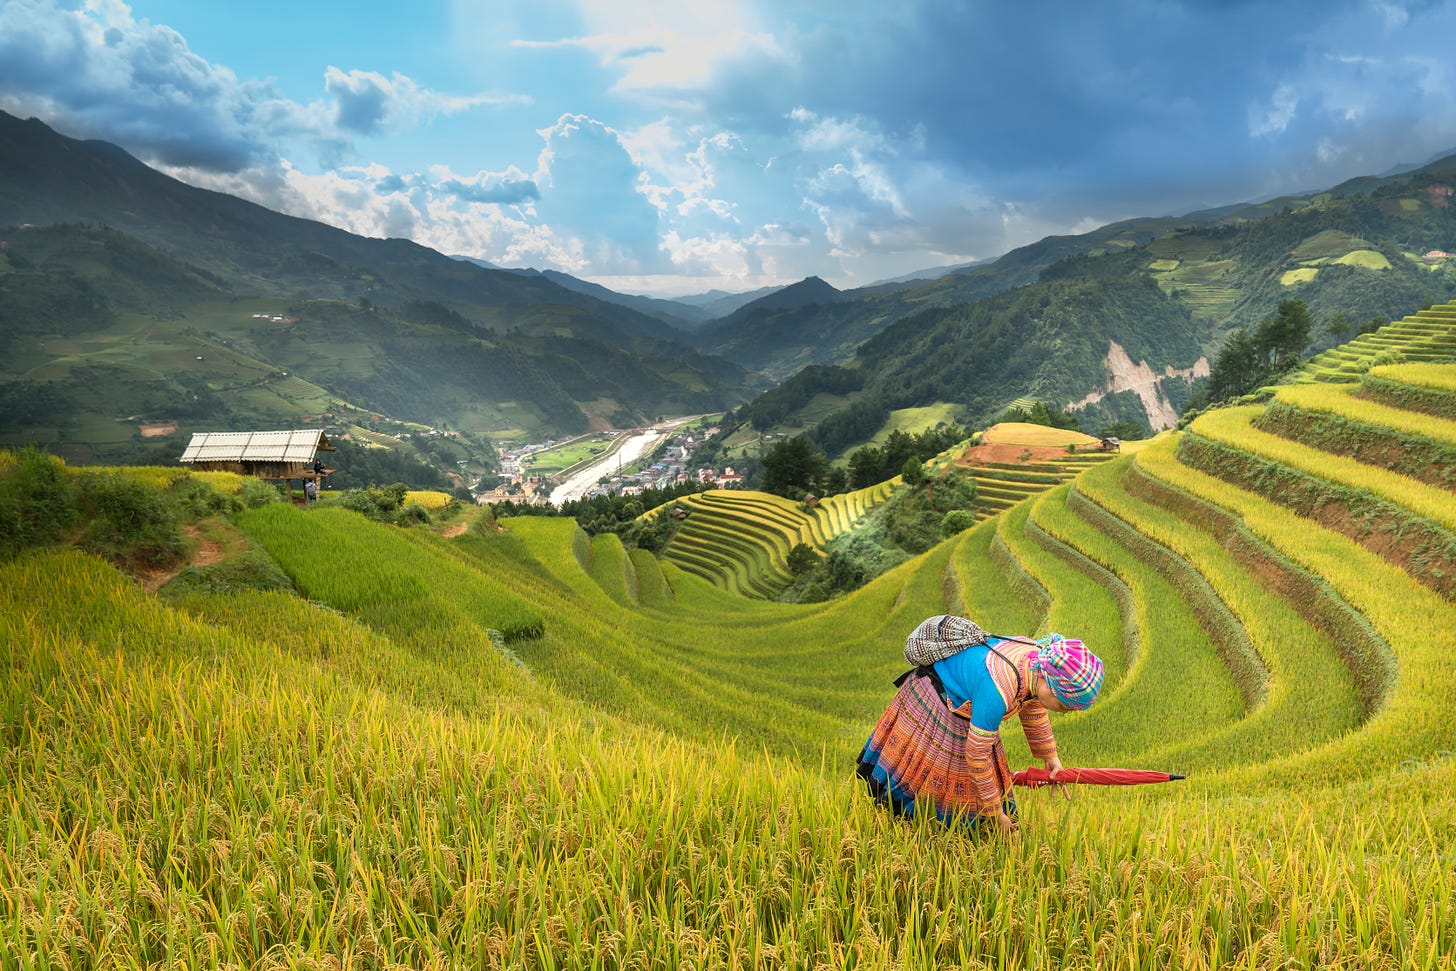 Colorfully dressed woman working in terraced rice fields